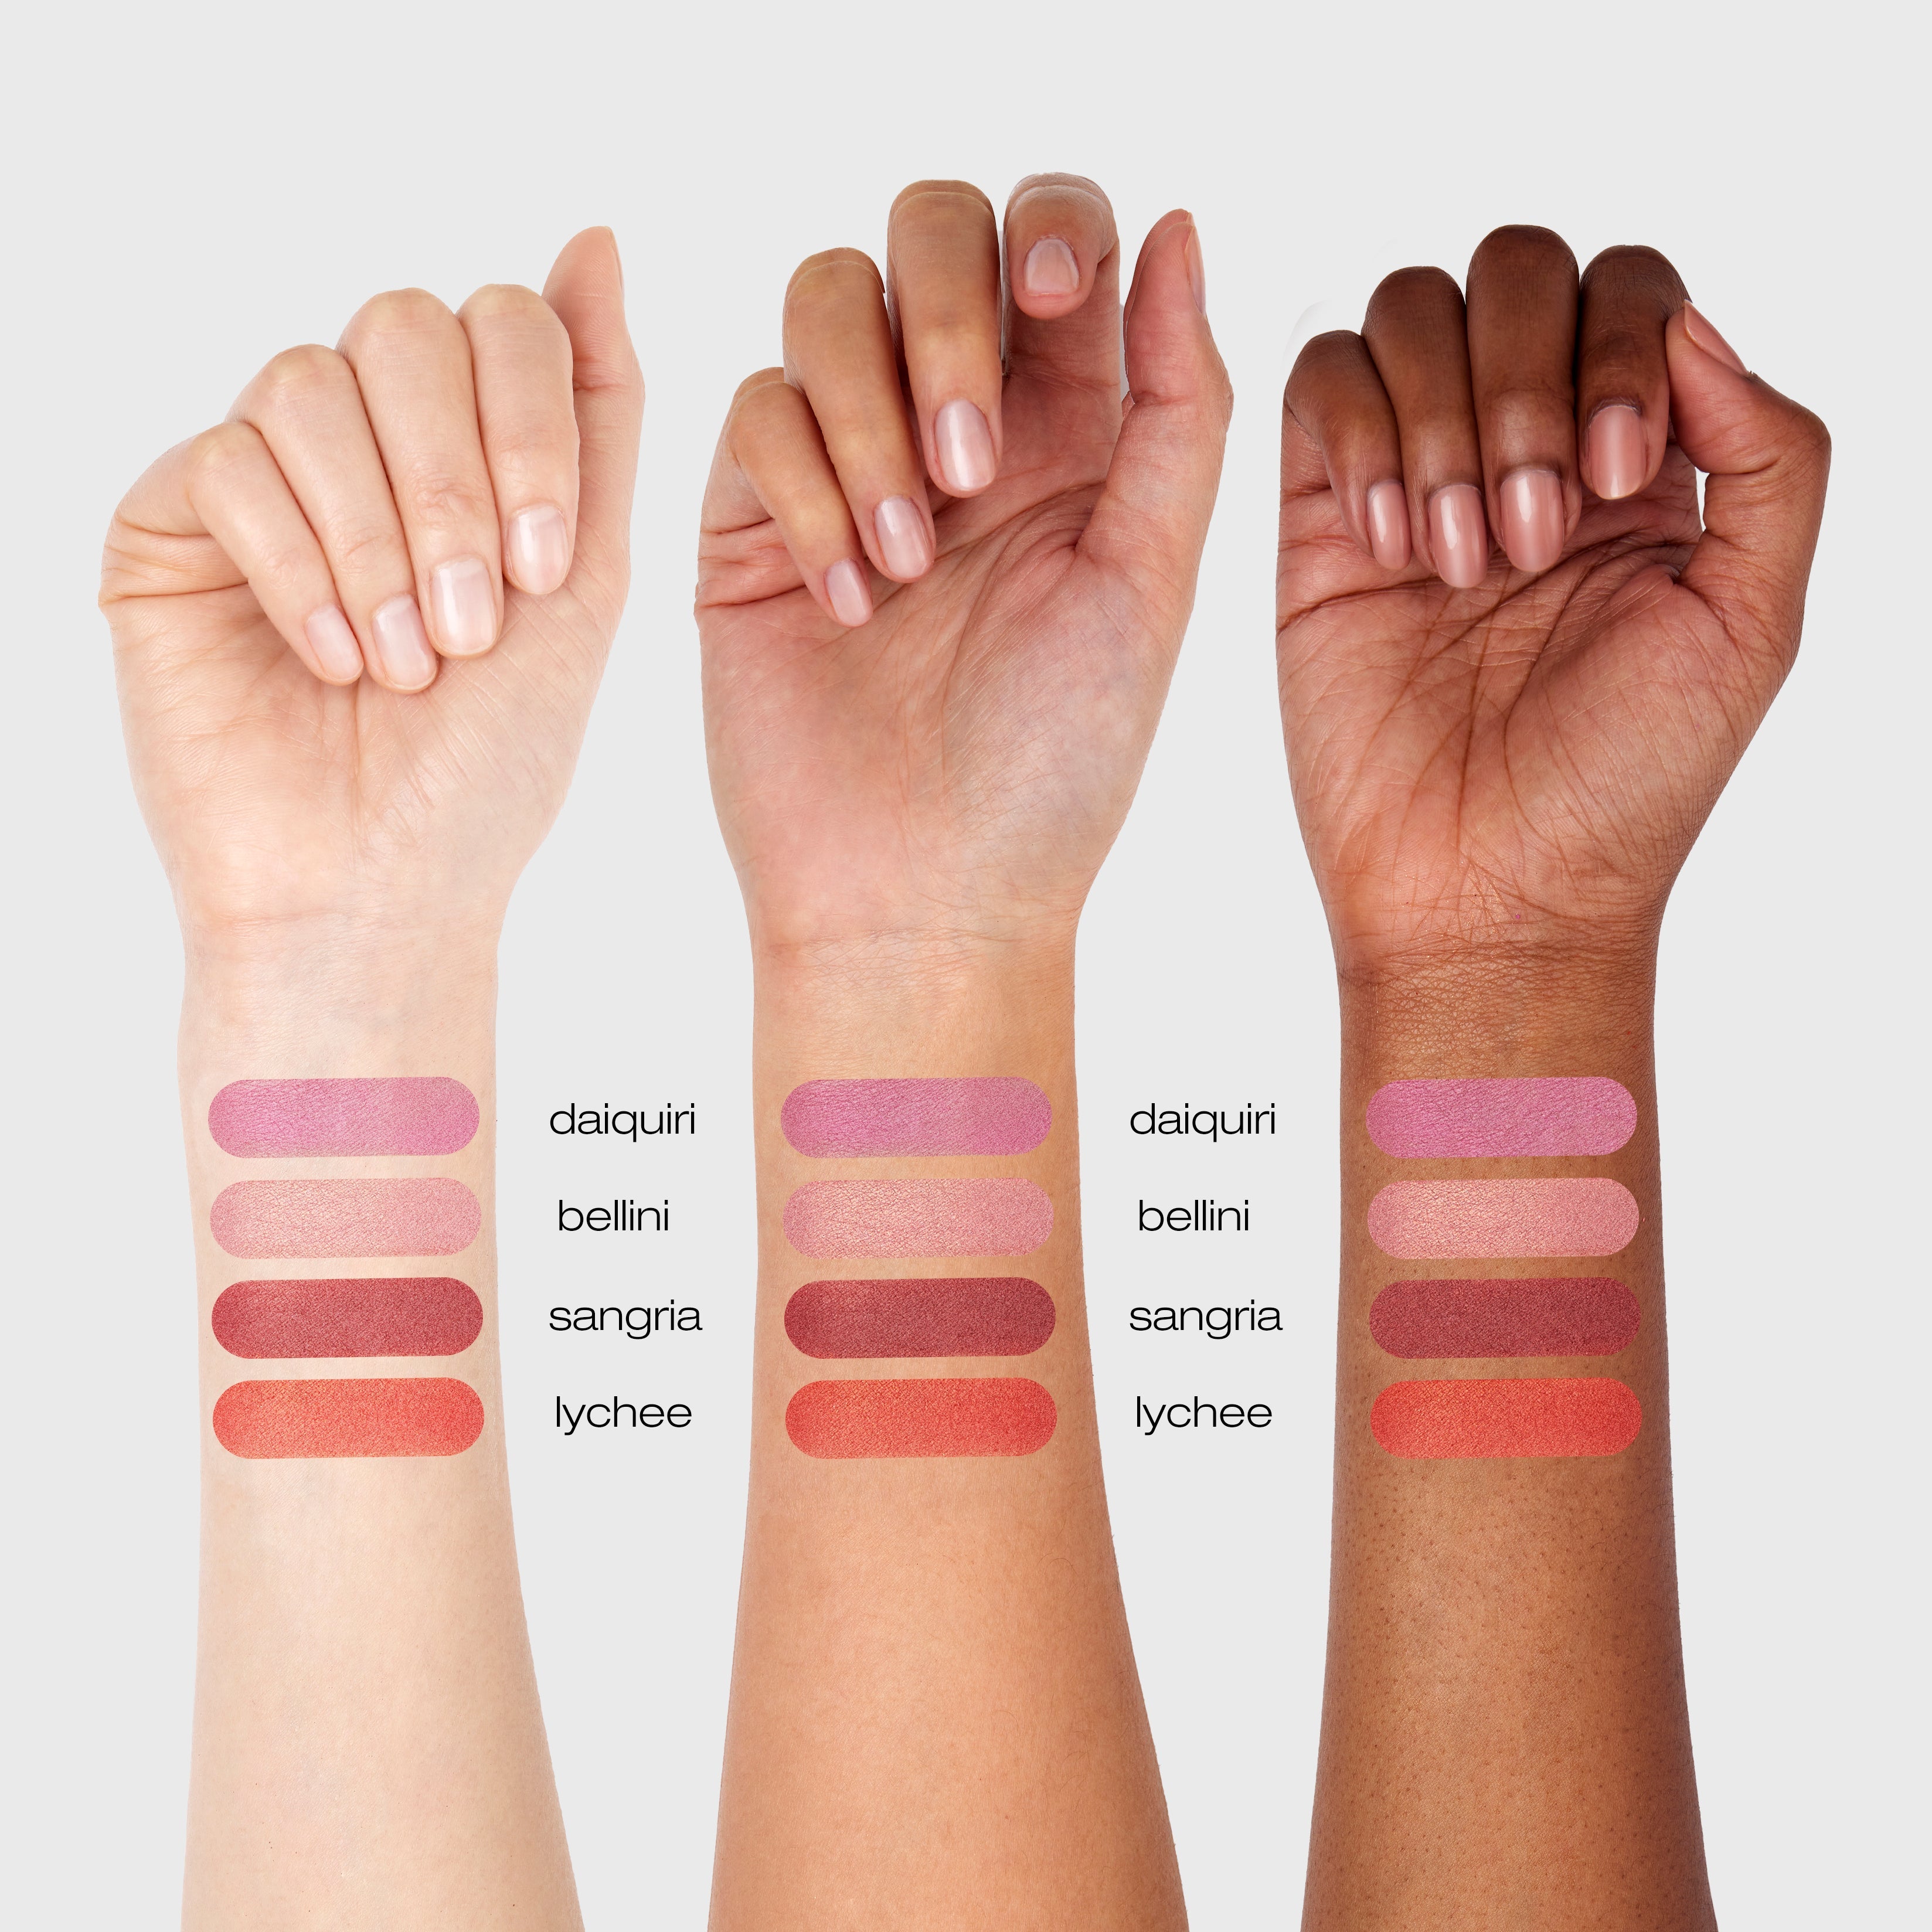 Spread of all the blush options on three different skin tones. Left being the lightest skin